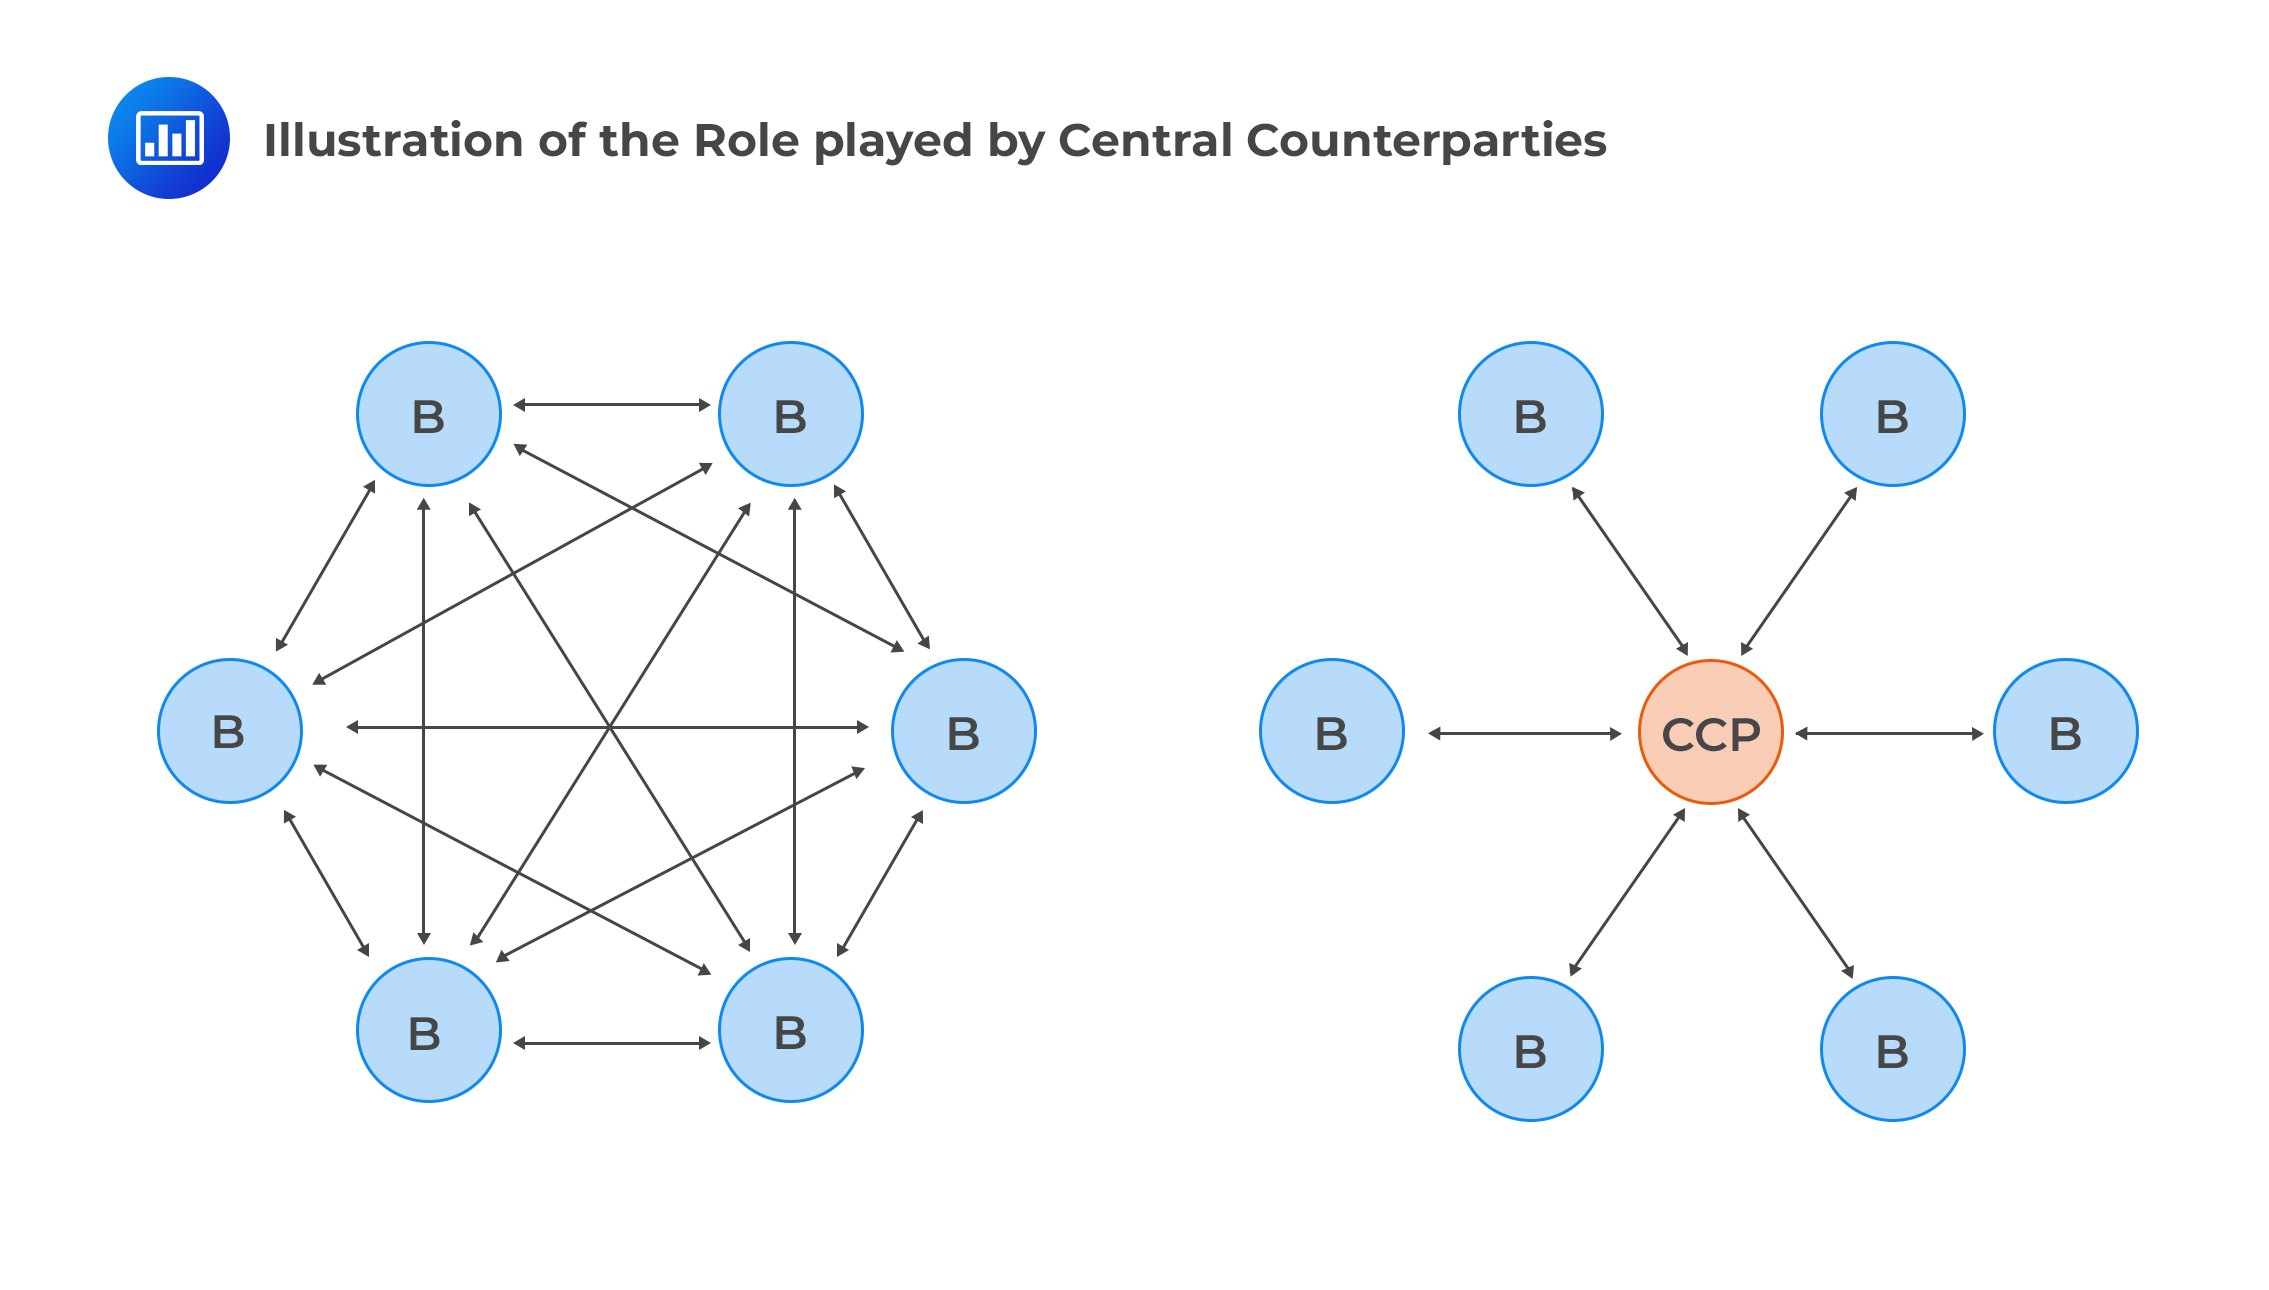 Illustration of the Role played by Central Counterparties